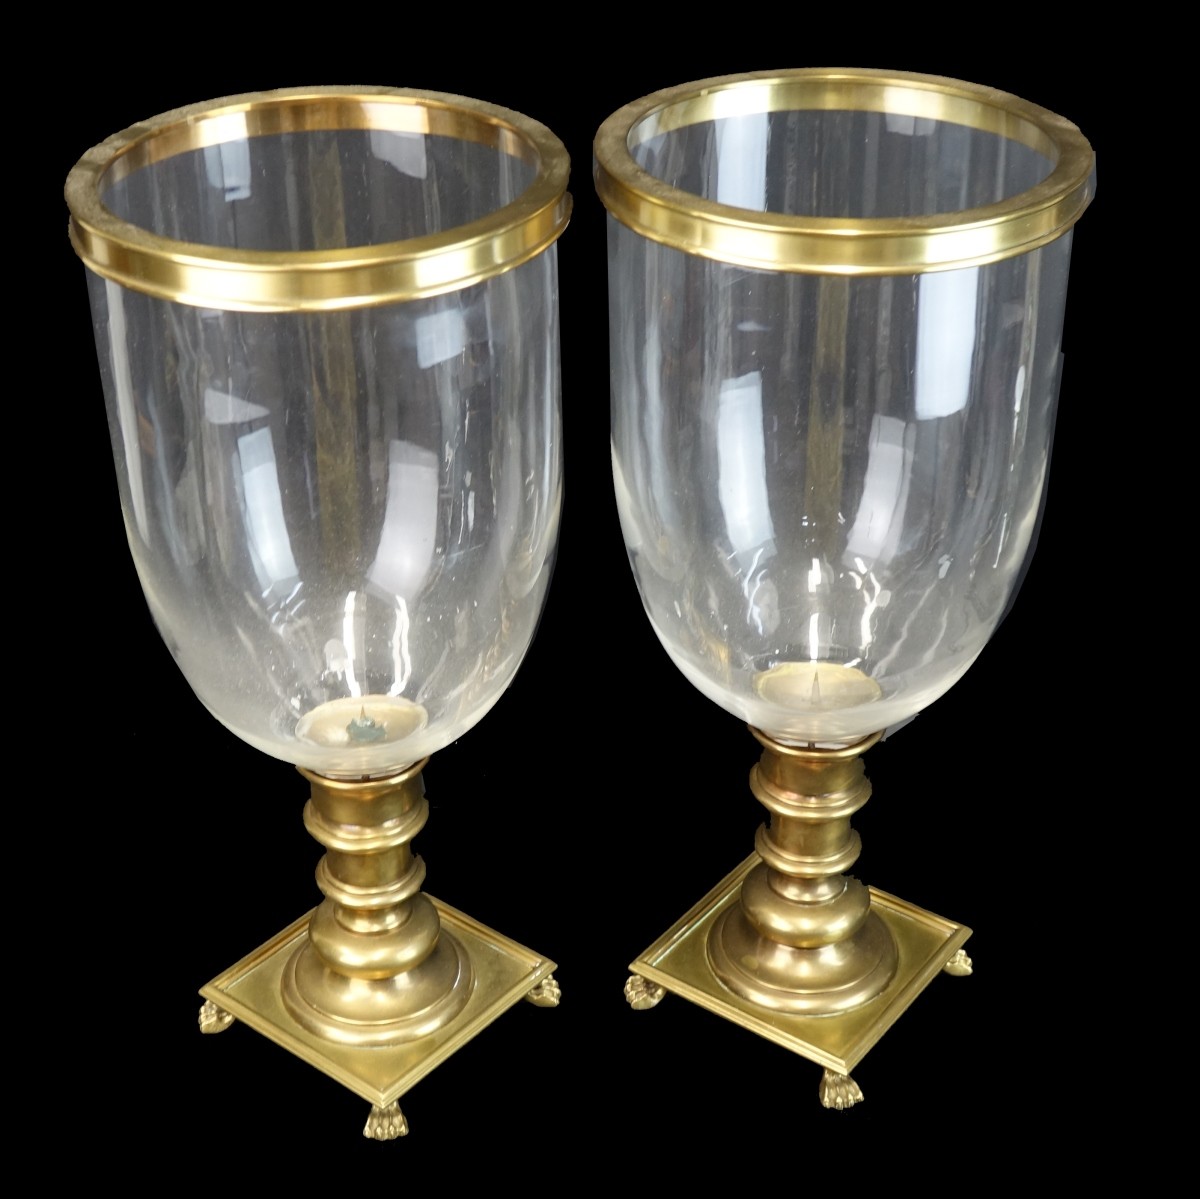 Pair of Decorative Crafts Inc. Candle Holders